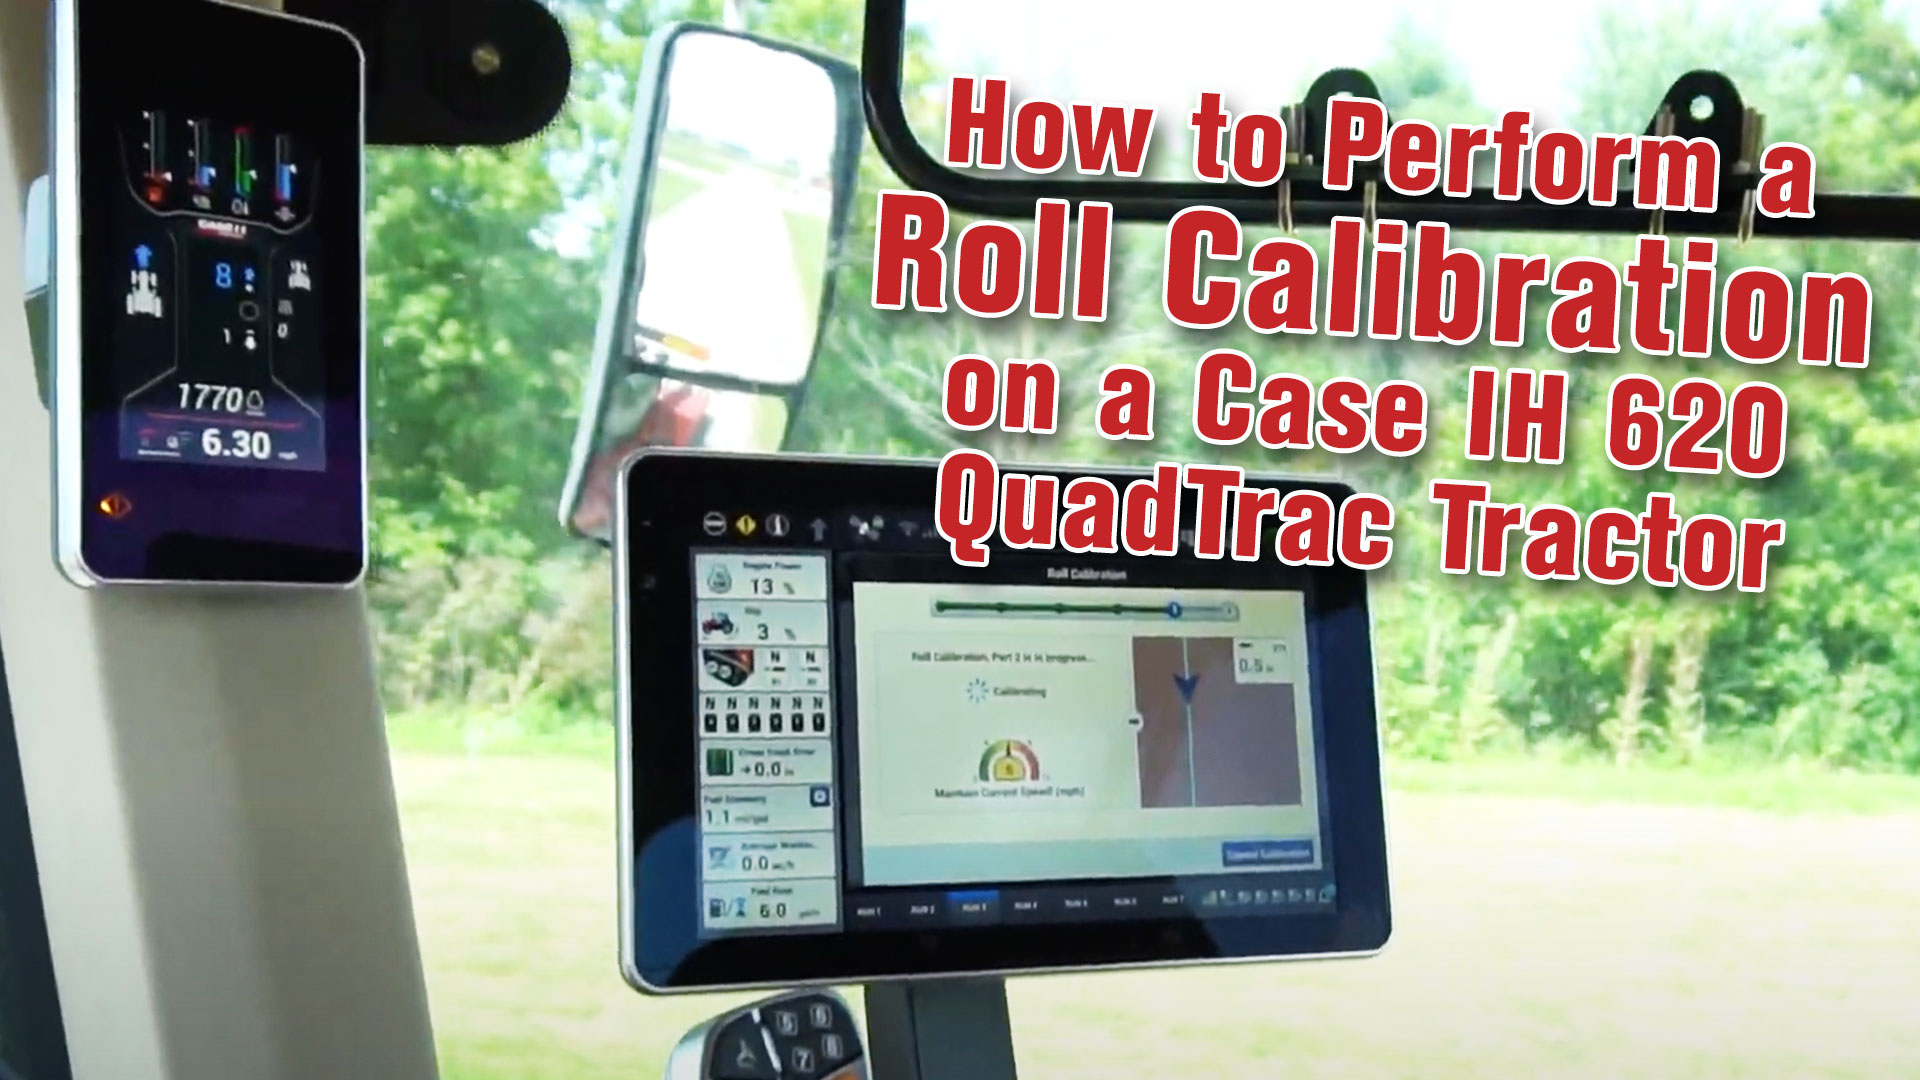 How-to-Perform-a-_Roll-Calibration-_on-a-Case-IH-620-_QuadTrac-Tractor.jpg